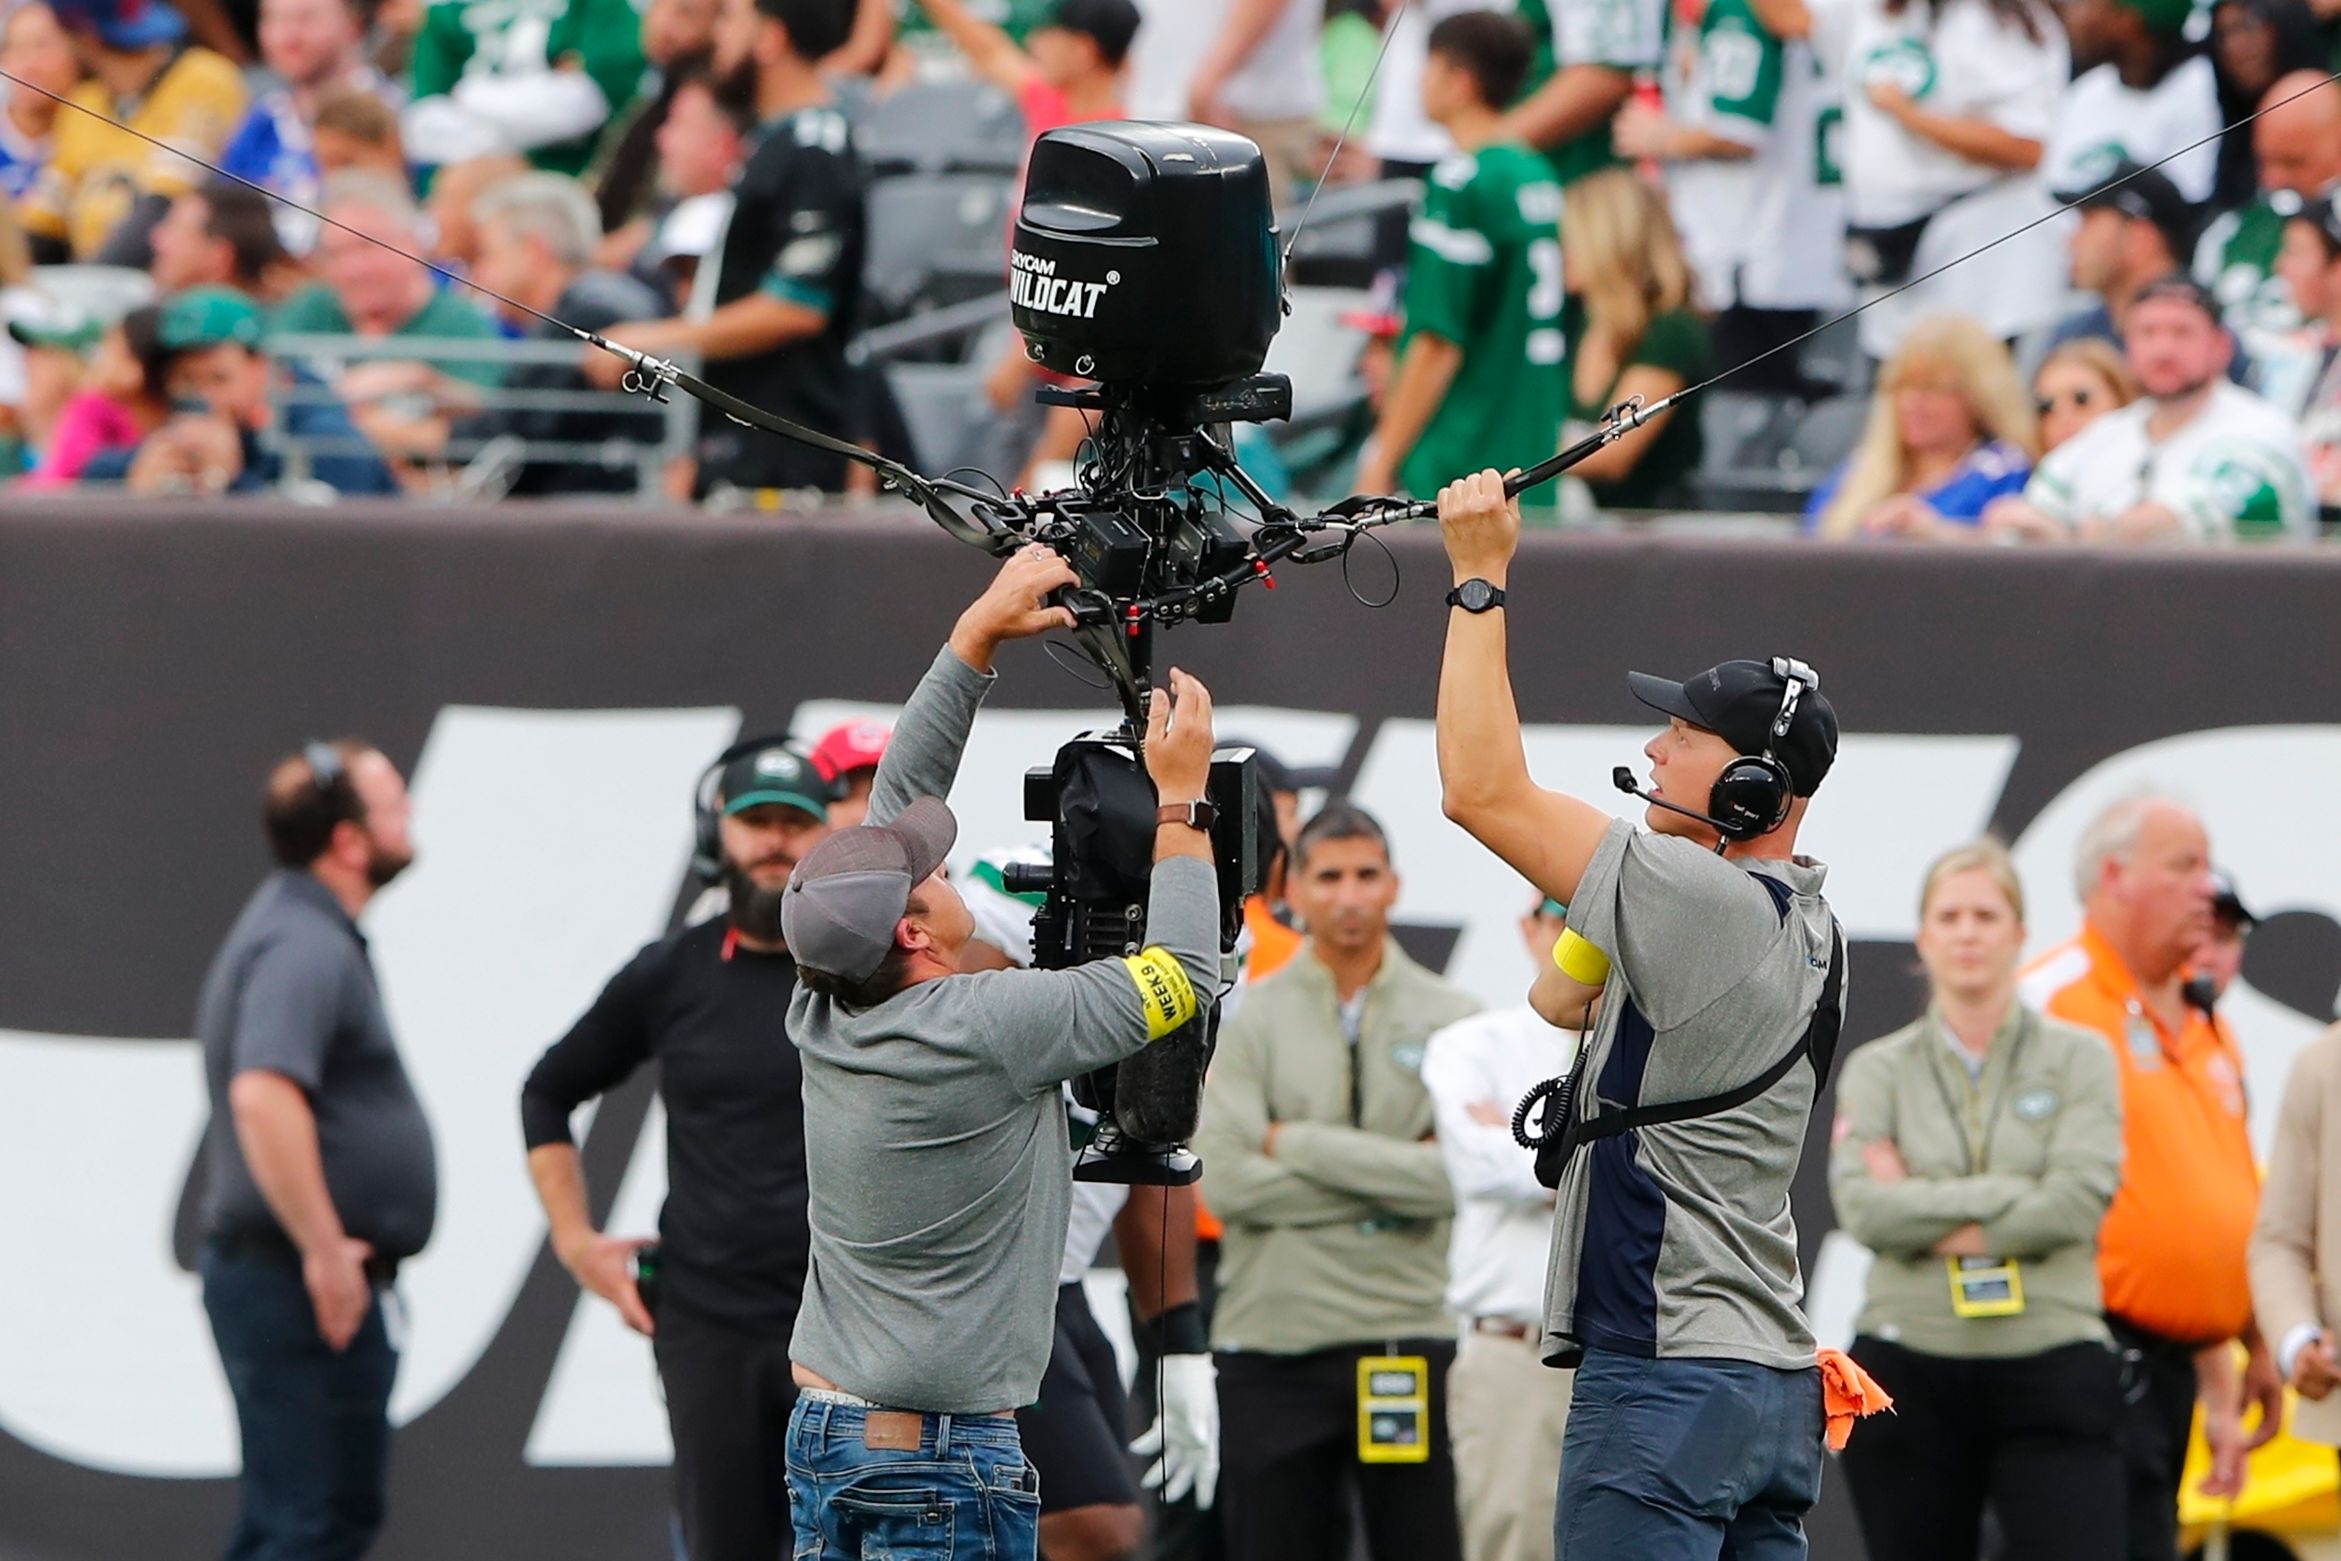 New York Jets vs Buffalo Bills halted after skycam breaks down mid-game: Watch